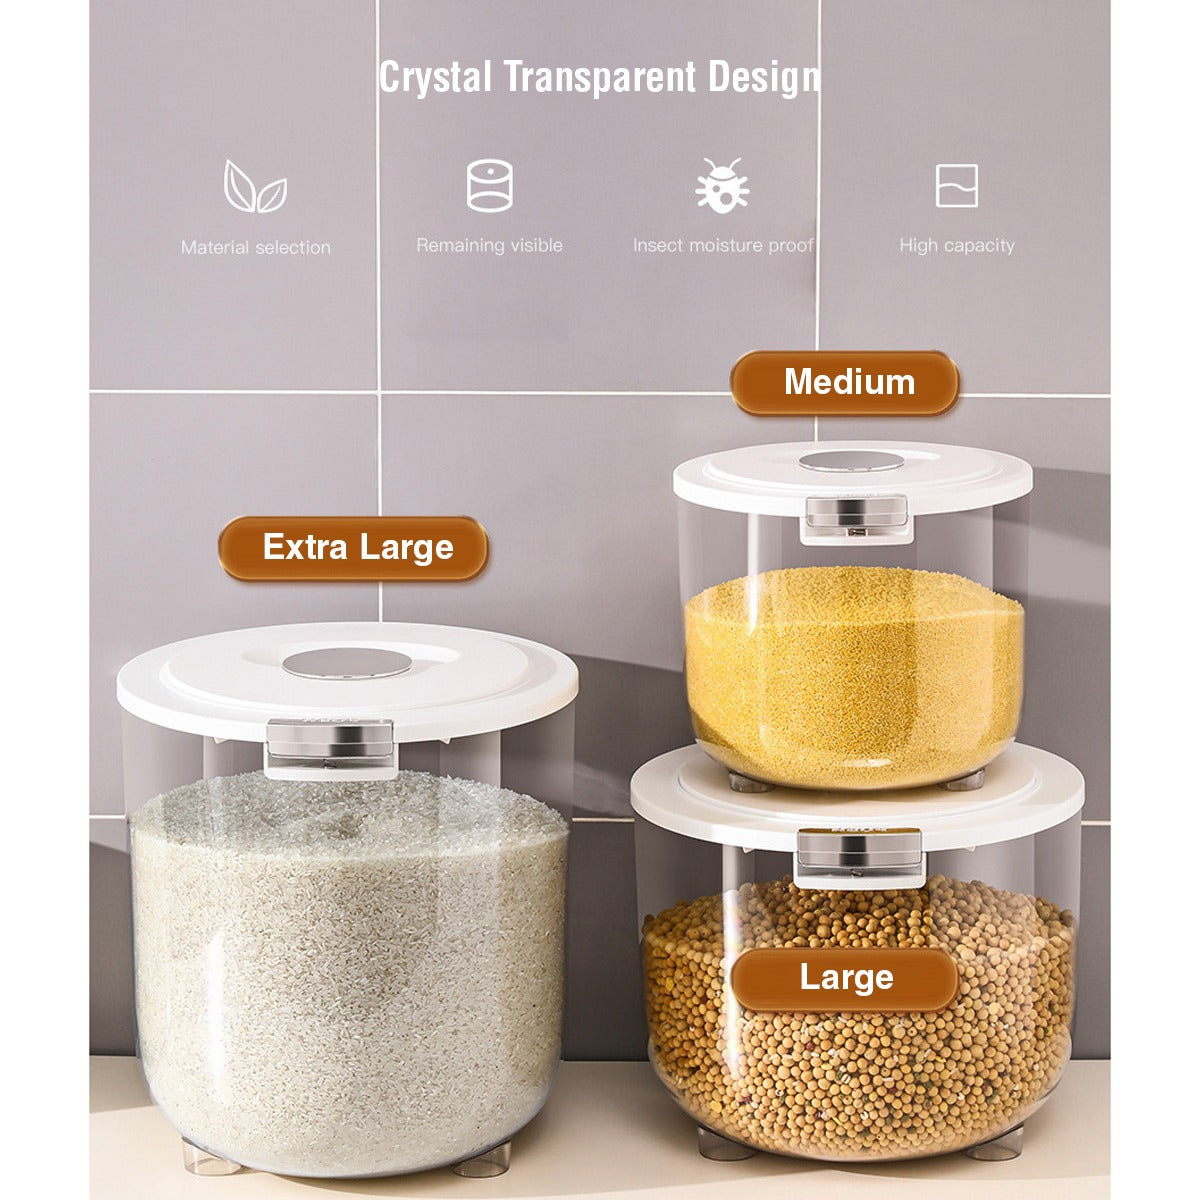 Transparent Moisture-Proof Sealed Tank Storage Bucket for Rice, Grains & Cereals